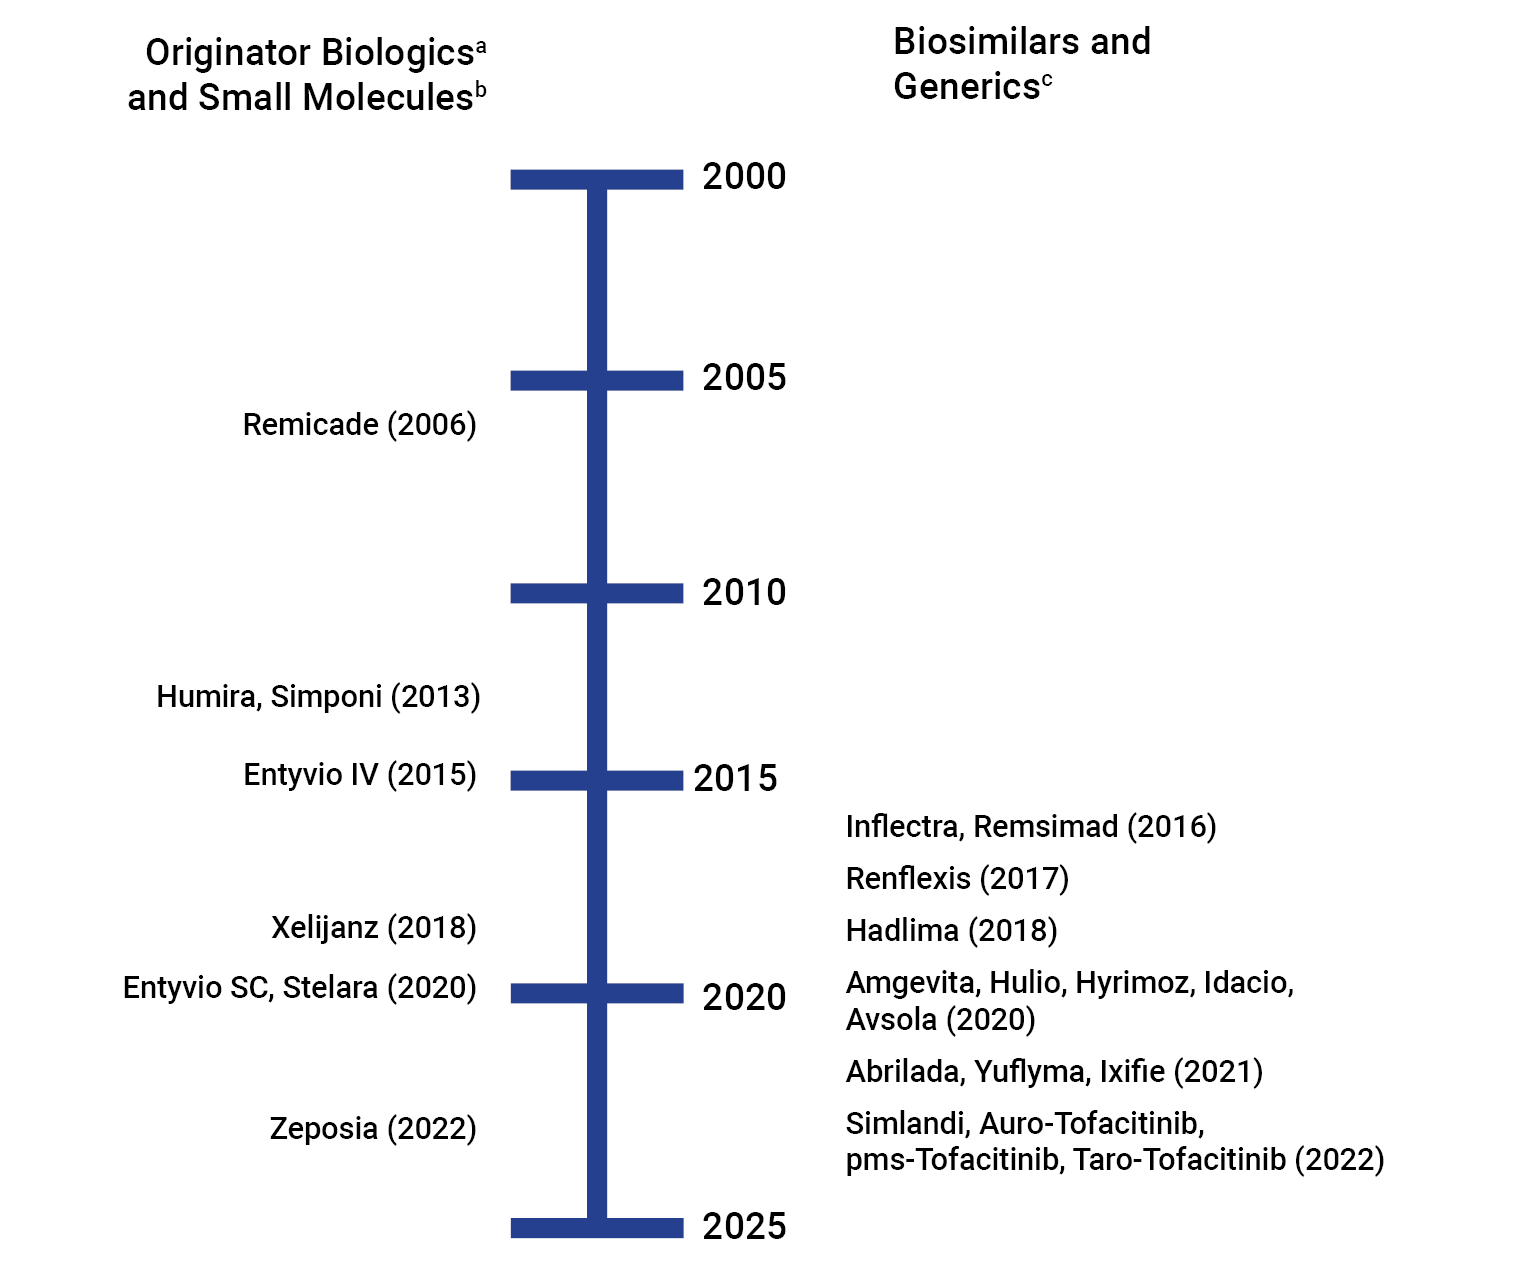 Figure 1 illustrates the approval timeline for originator biologics, small molecules, and the available generic or biosimilar versions by Health Canada by Notice of Compliance date for ulcerative colitis indication. The timeline begins with the approval of Remicade in 2006 and ends with Taro-Tofacitinib in 2022.